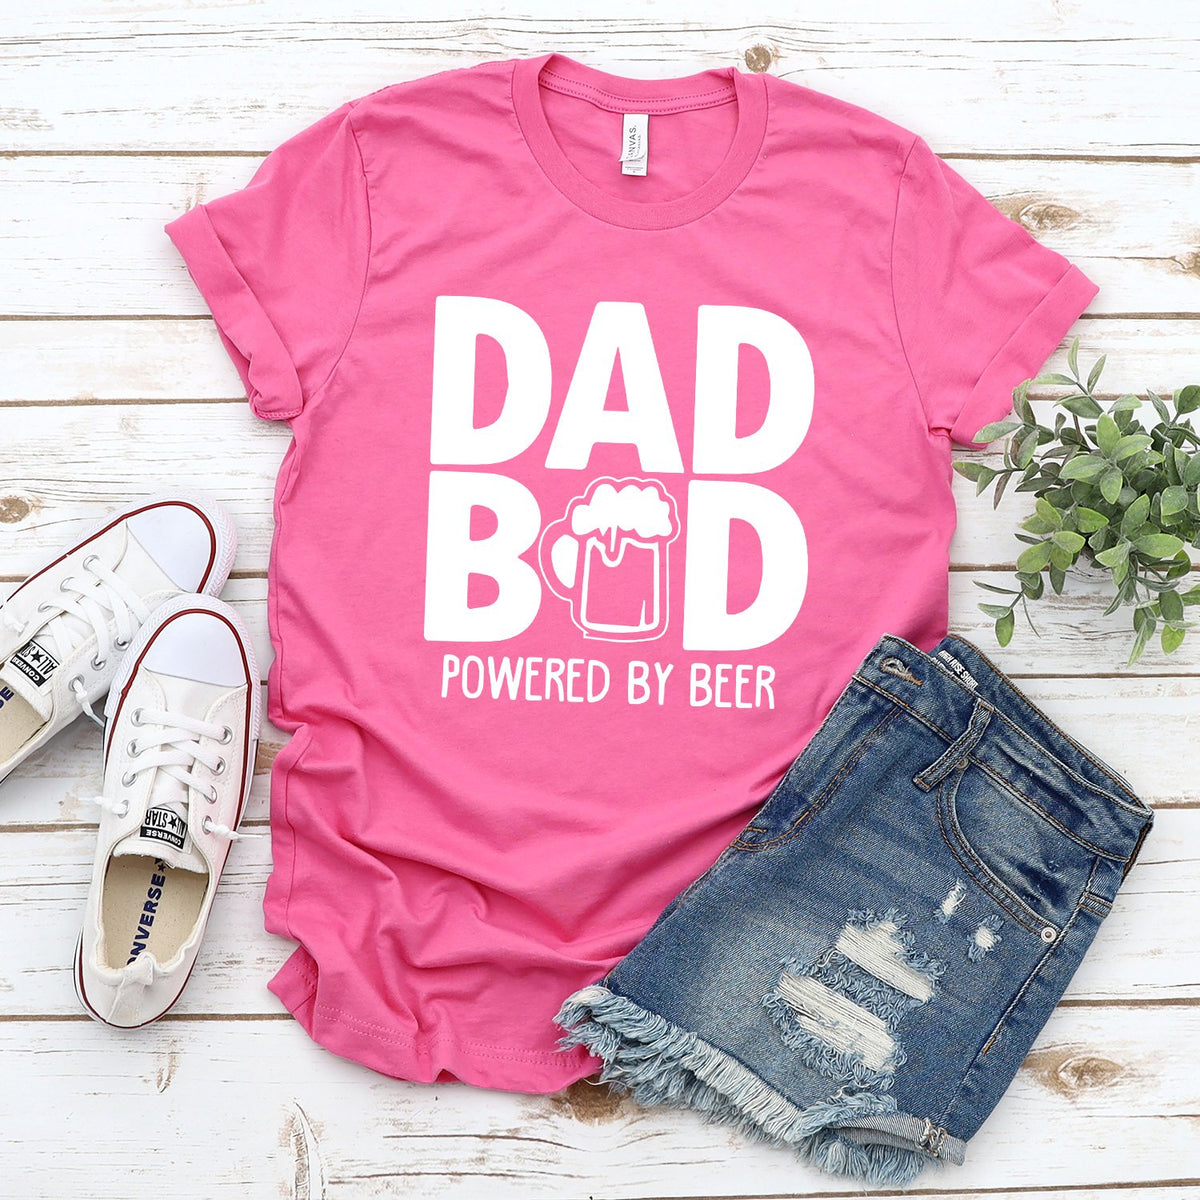 Dad Bod Powered By Beer - Short Sleeve Tee Shirt